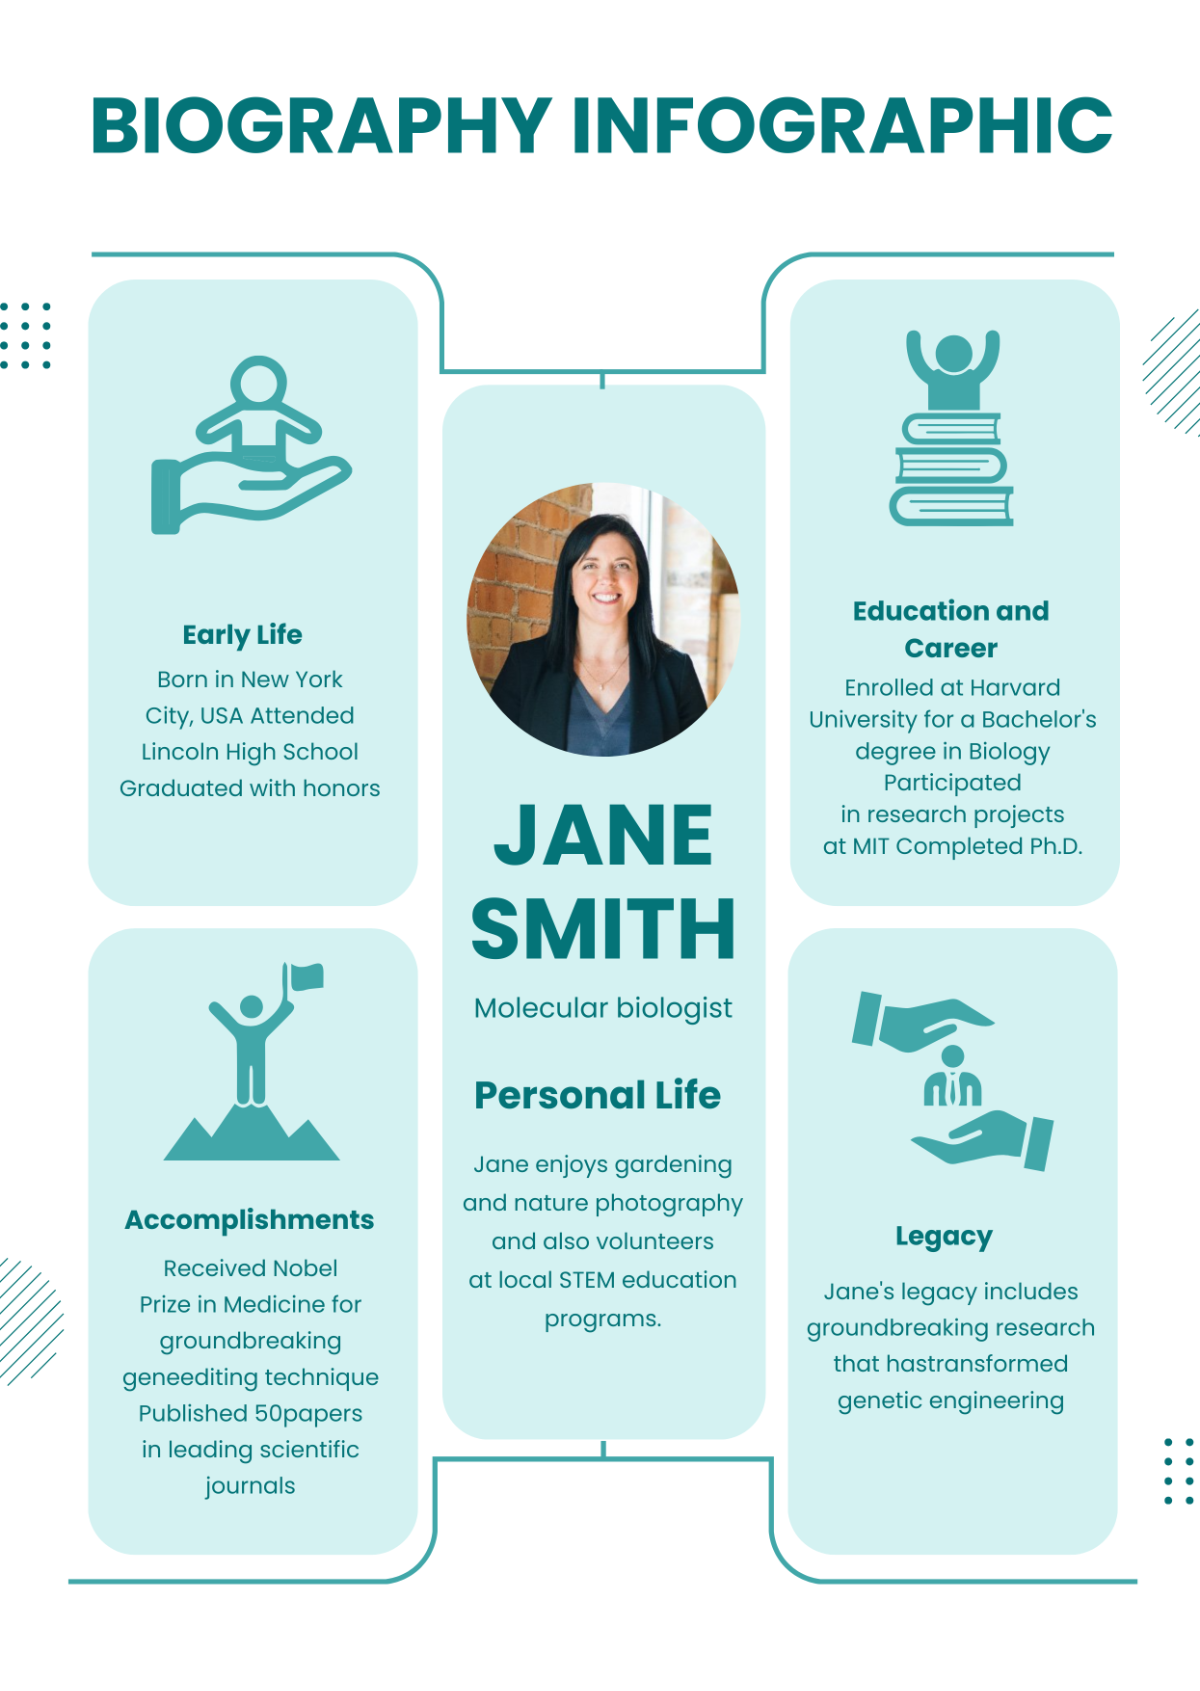 Free Biography Infographic Template